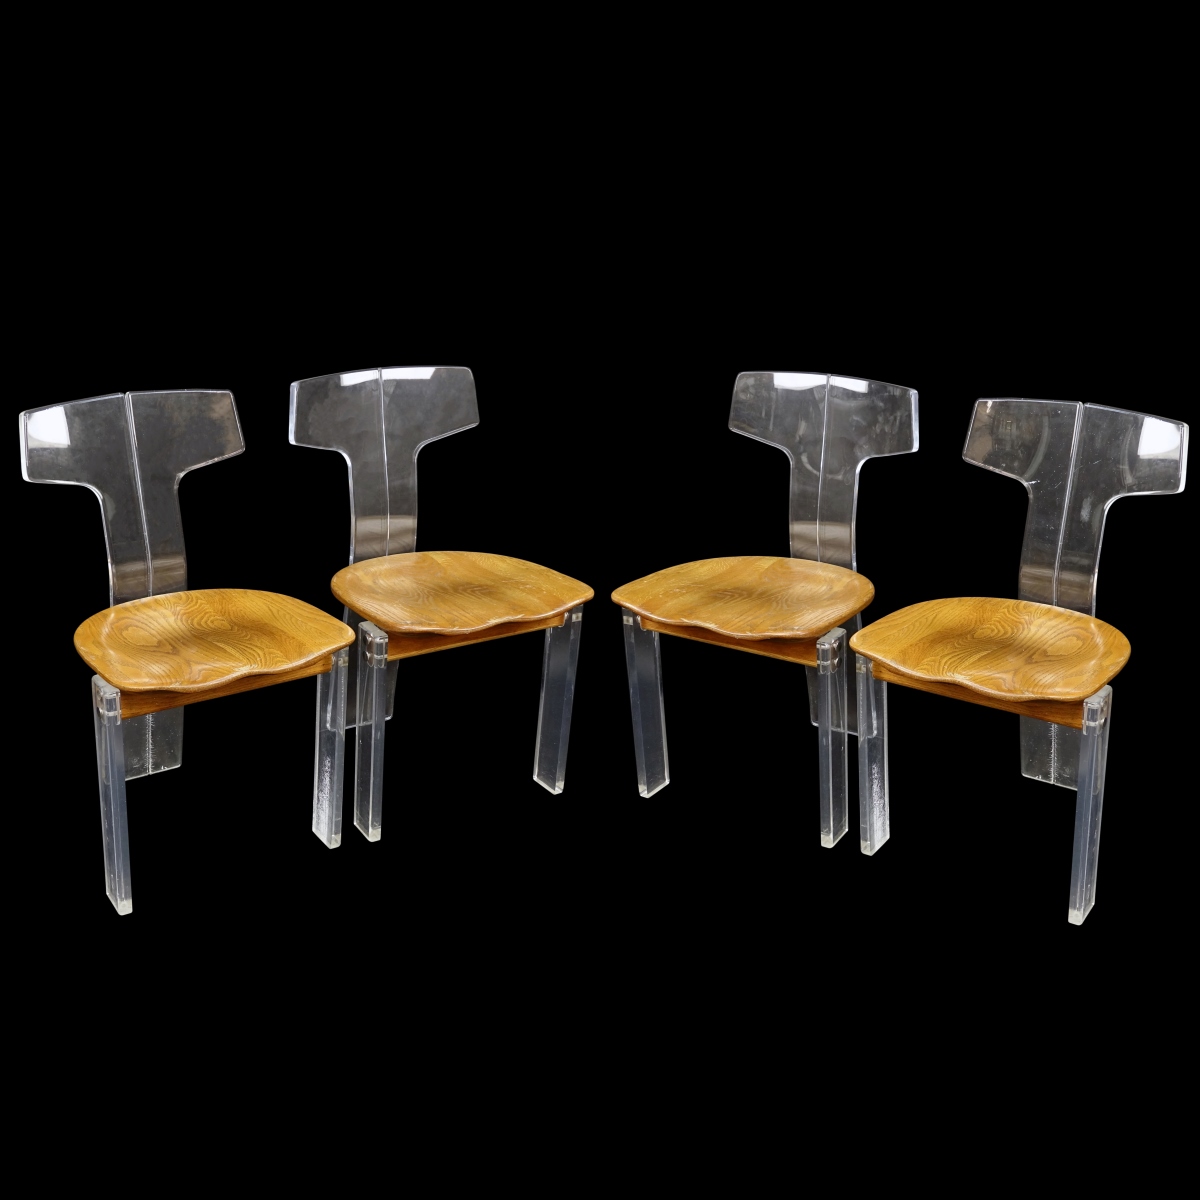 Lucite and Wood Chairs